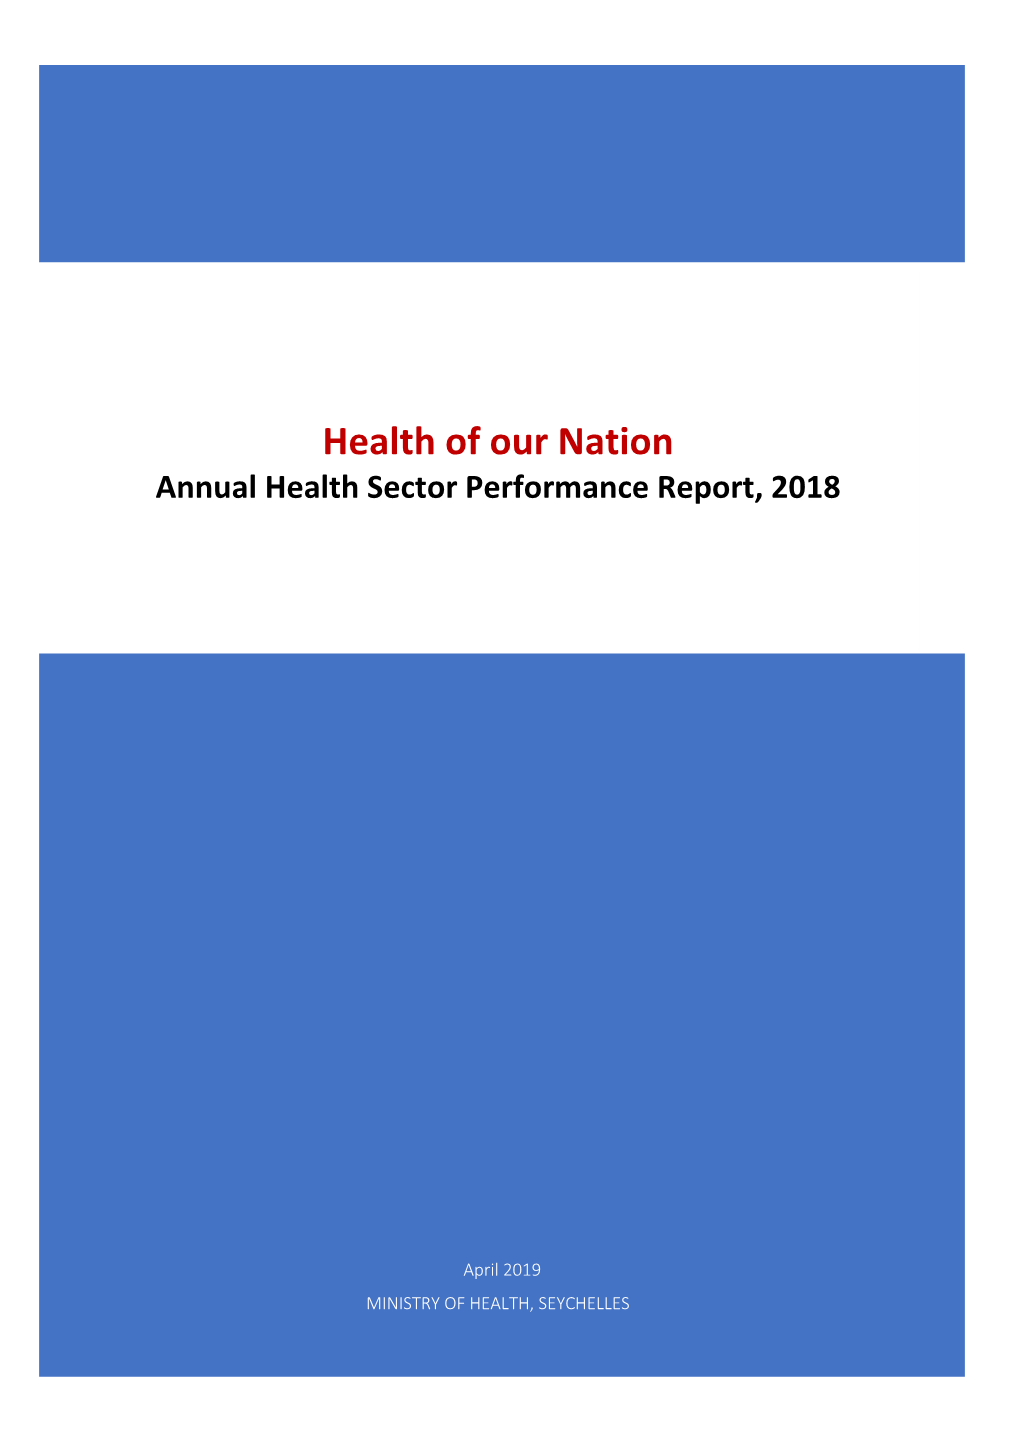 2018 Annual Health Sector Performance Report-Full Version